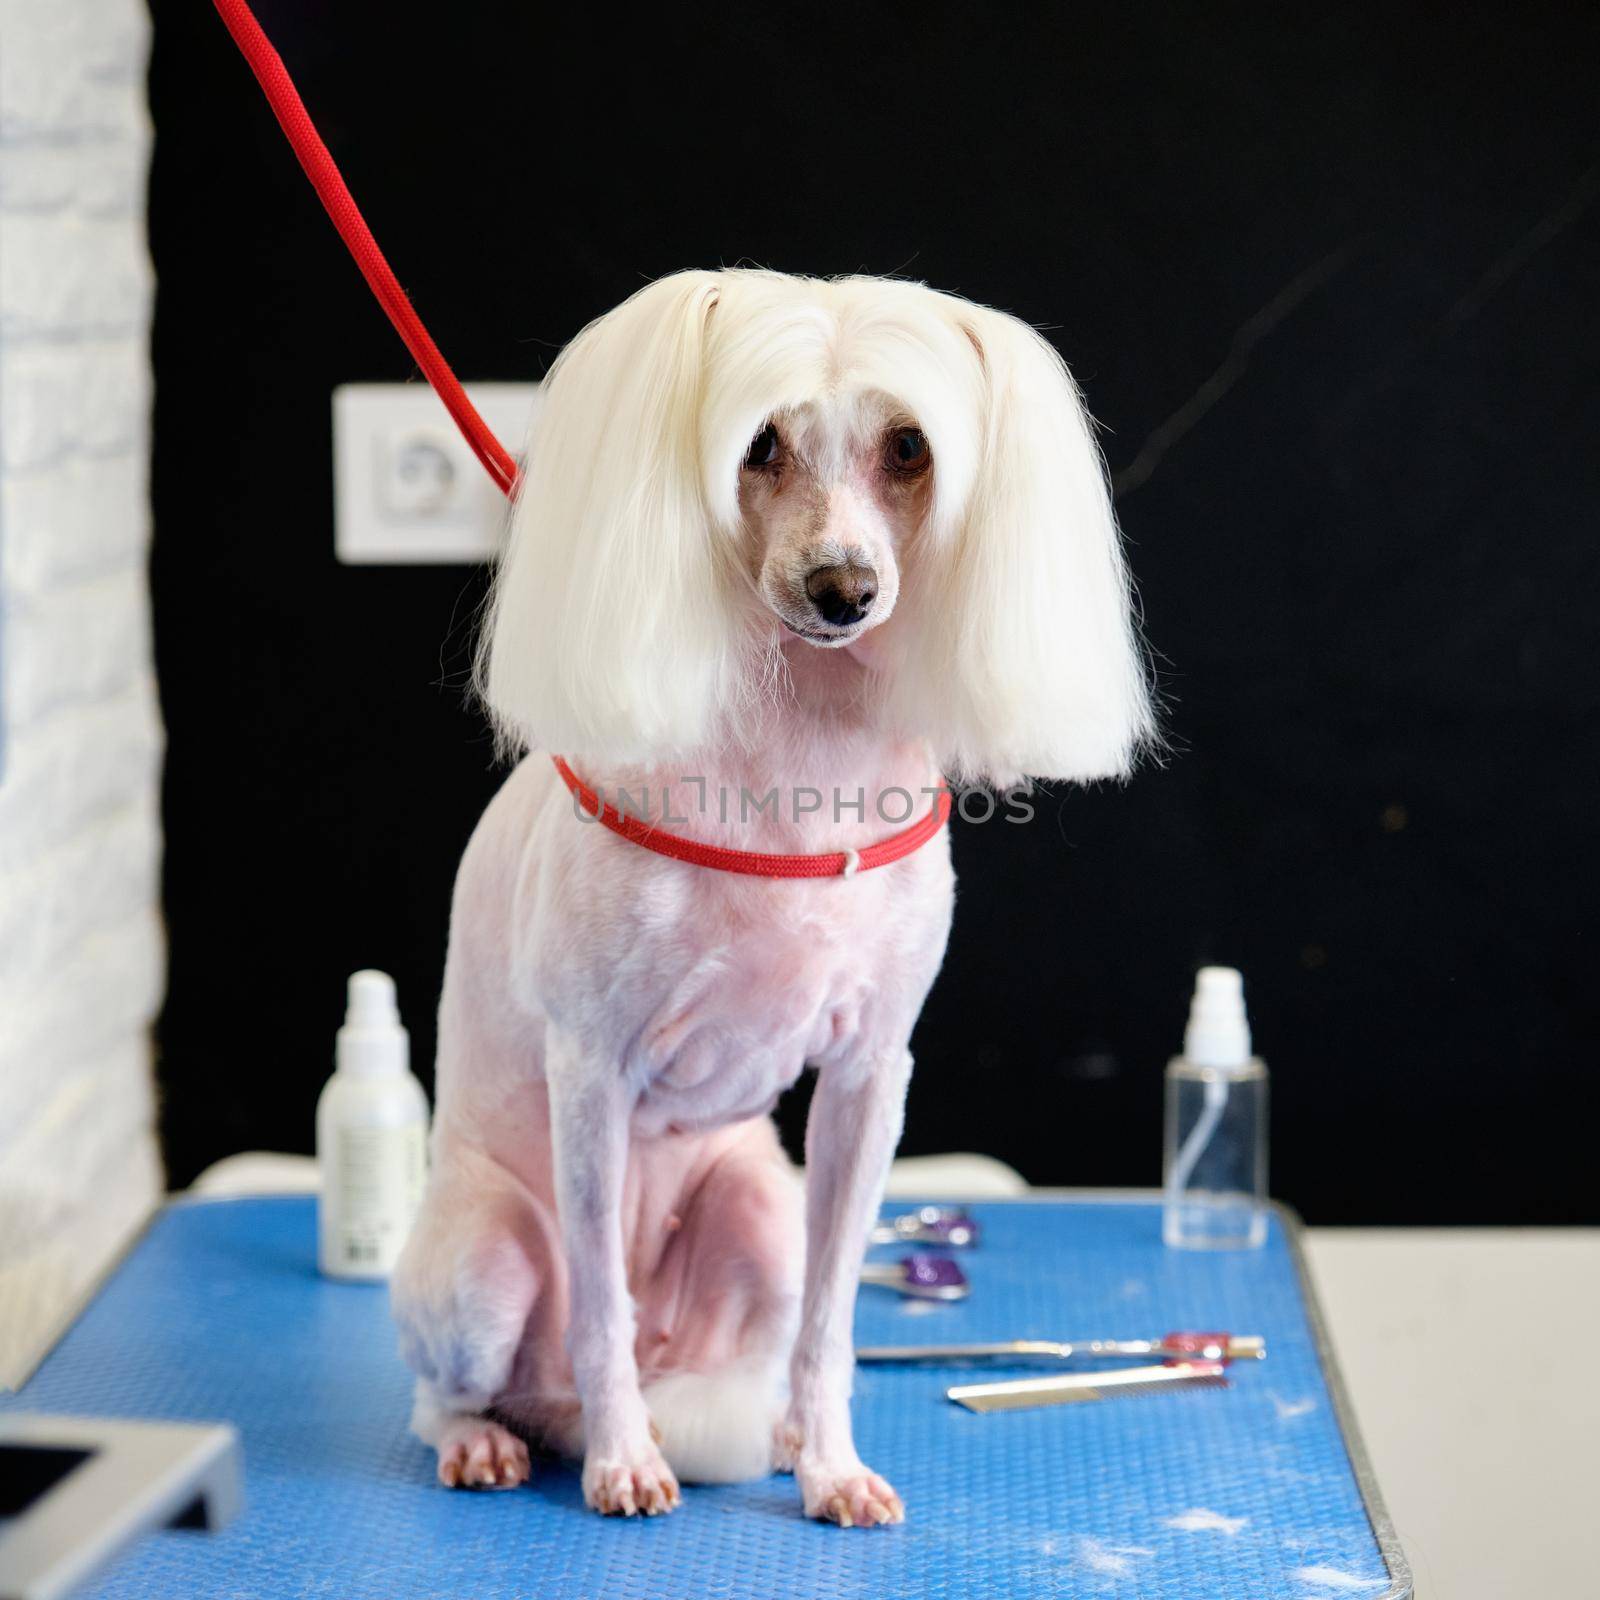 Chinese crested dog on a grooming table in an animal salon.